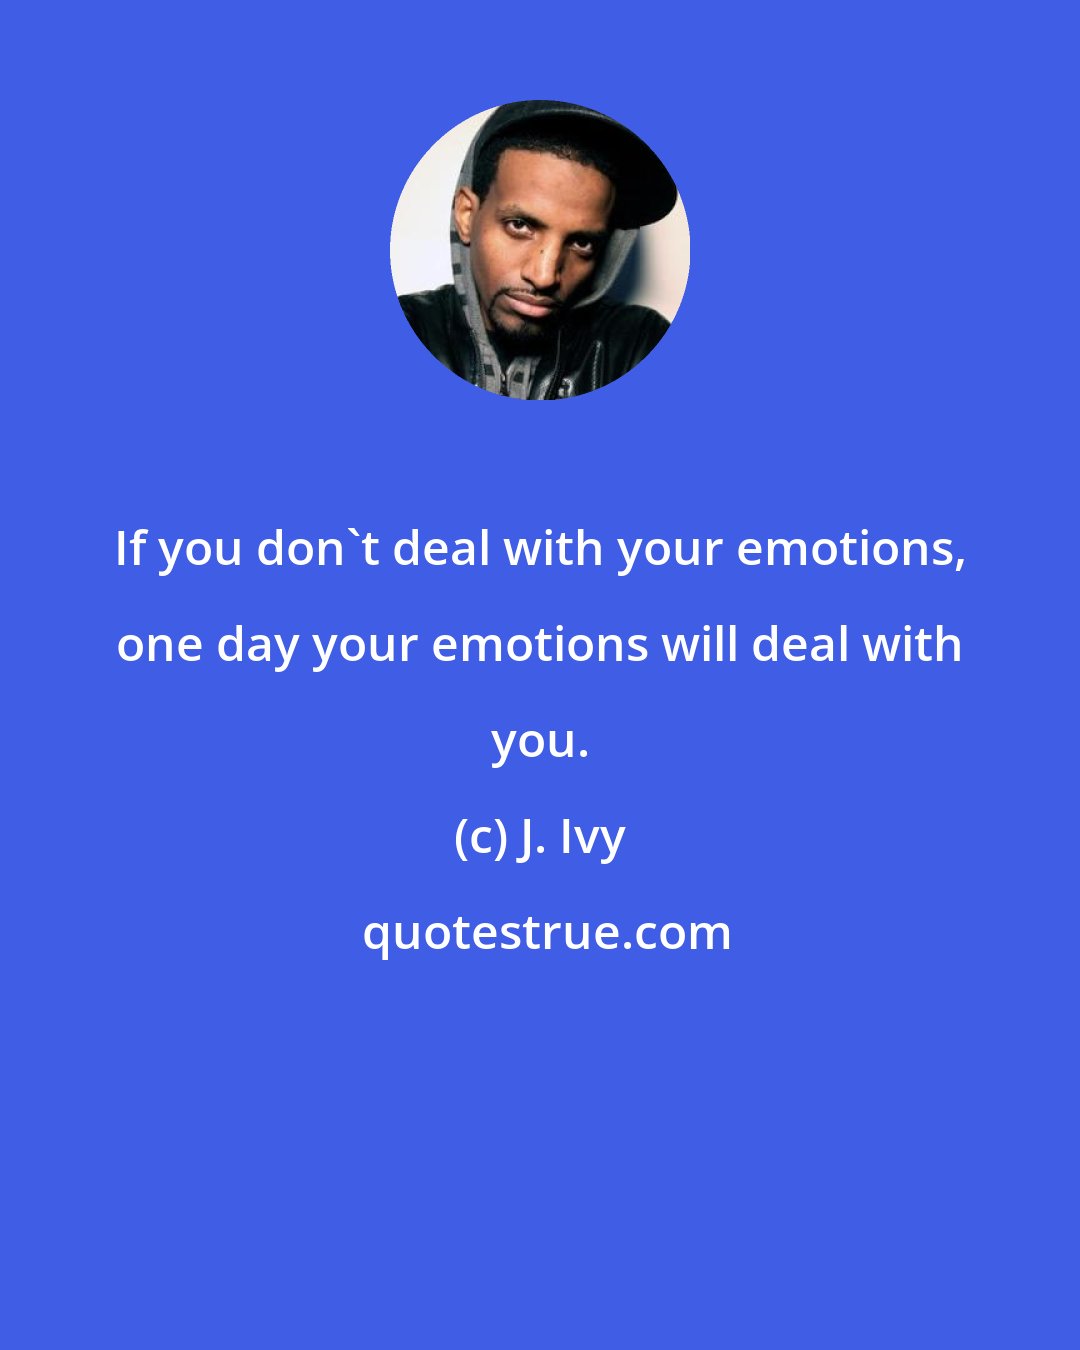 J. Ivy: If you don't deal with your emotions, one day your emotions will deal with you.